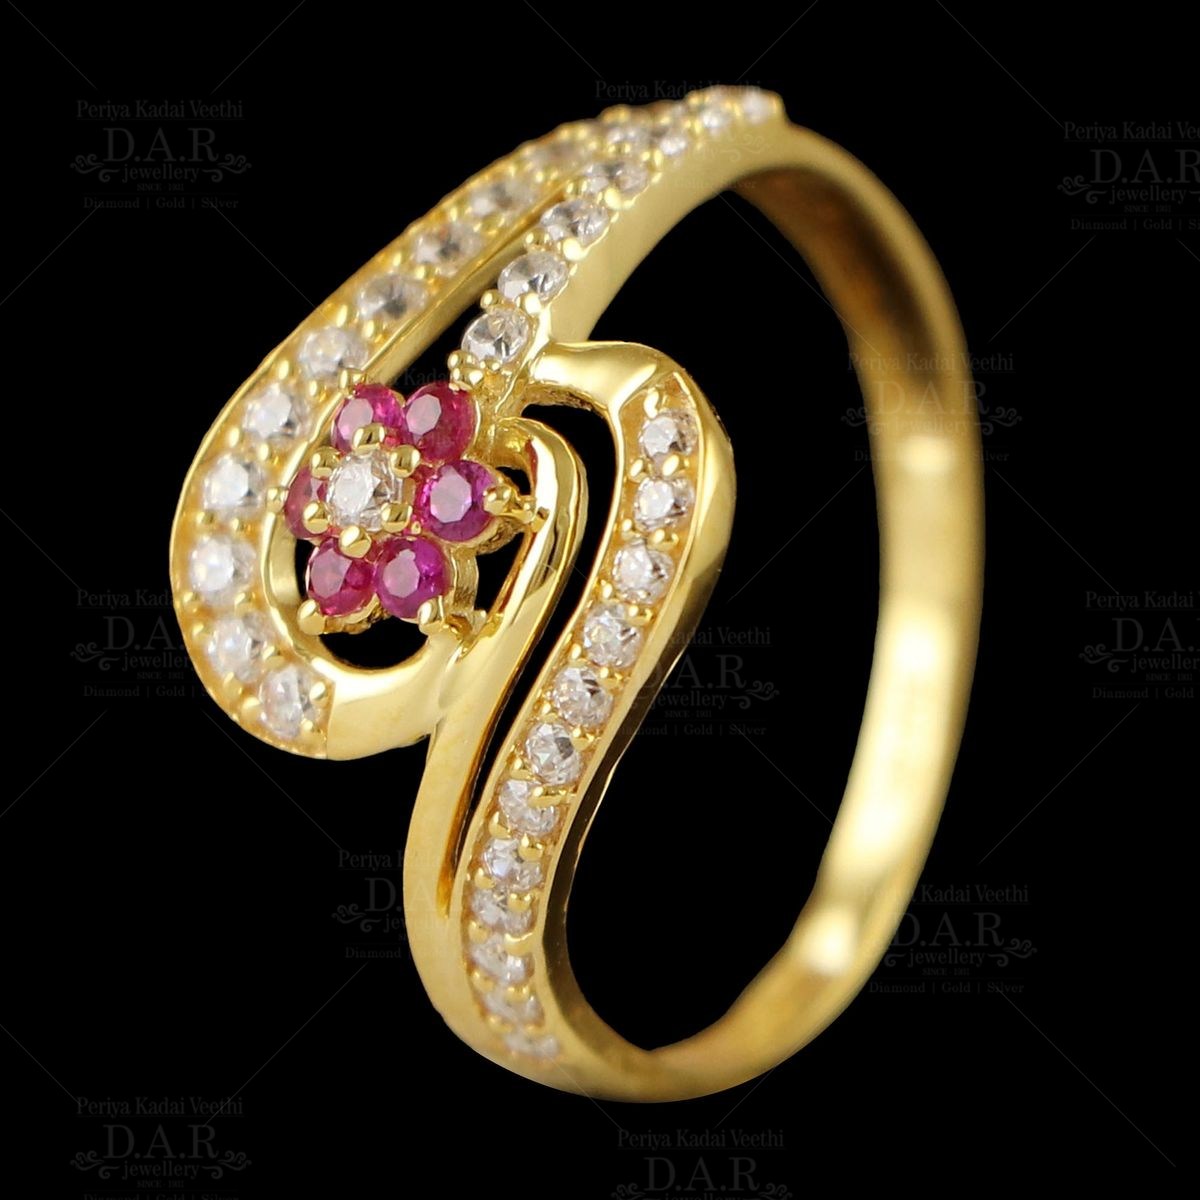 Buy quality 916 delicate light weight ladies ring in Ahmedabad